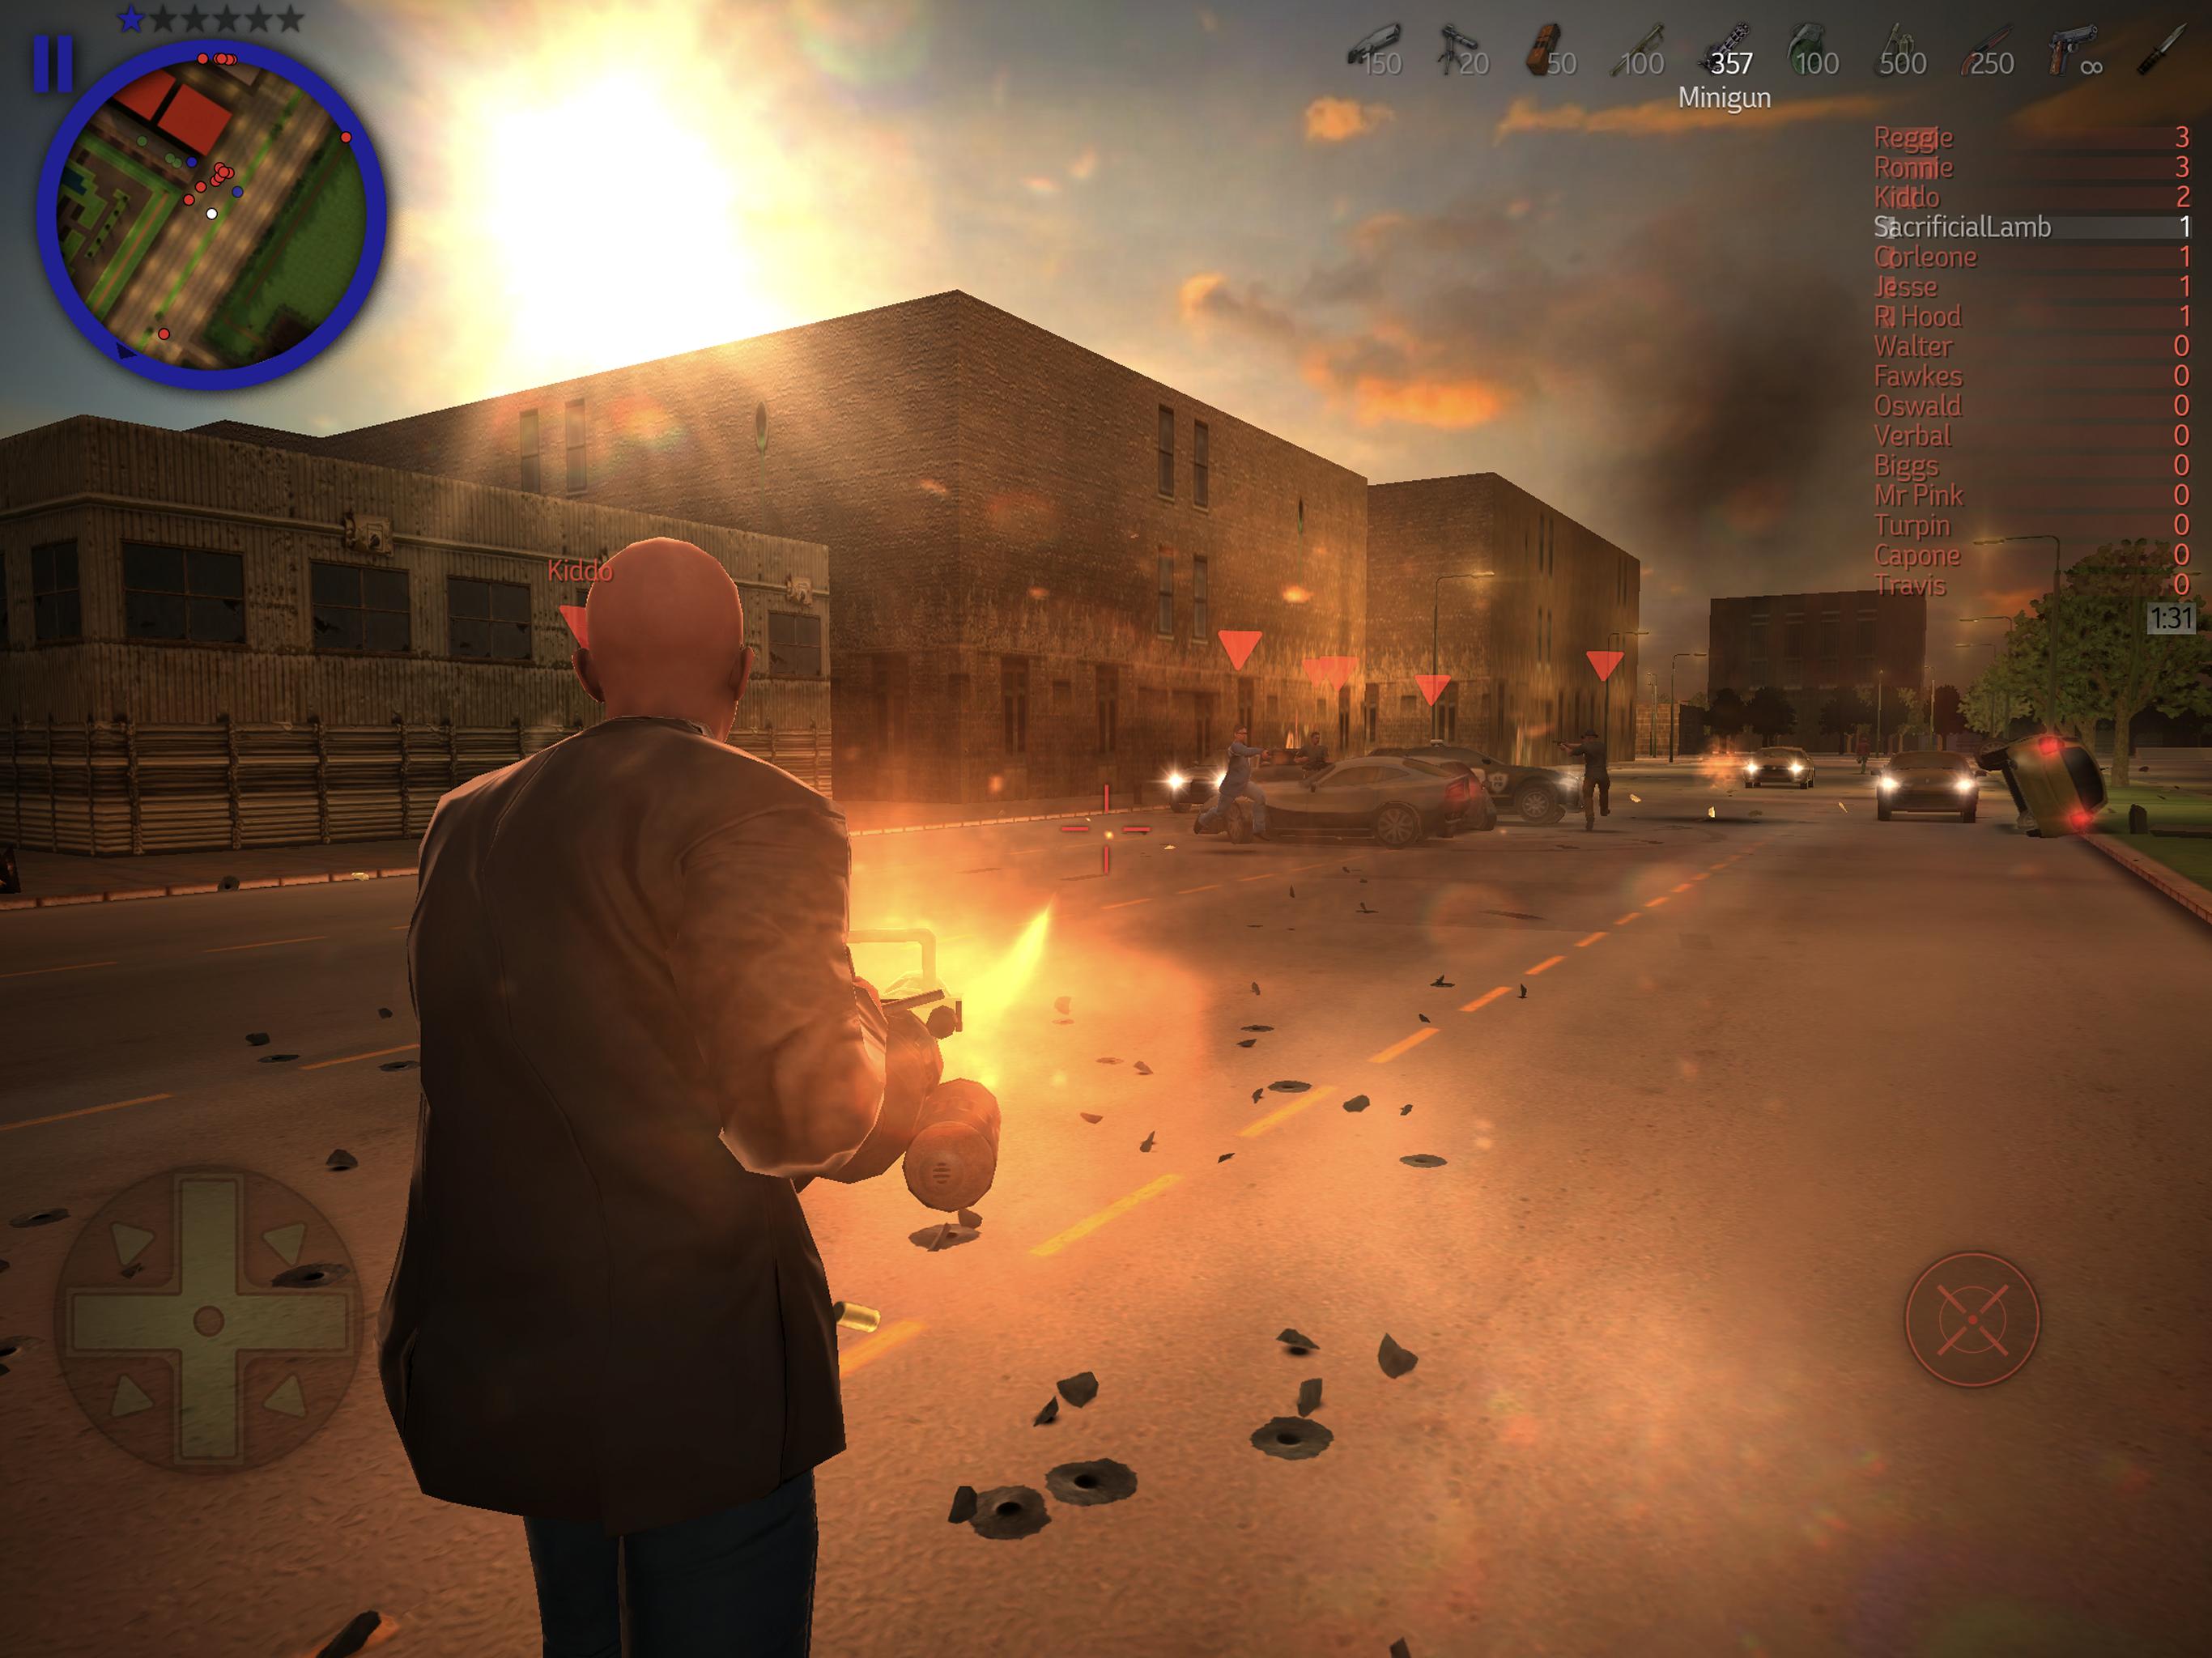 Payback 2 for Android - APK Download - 